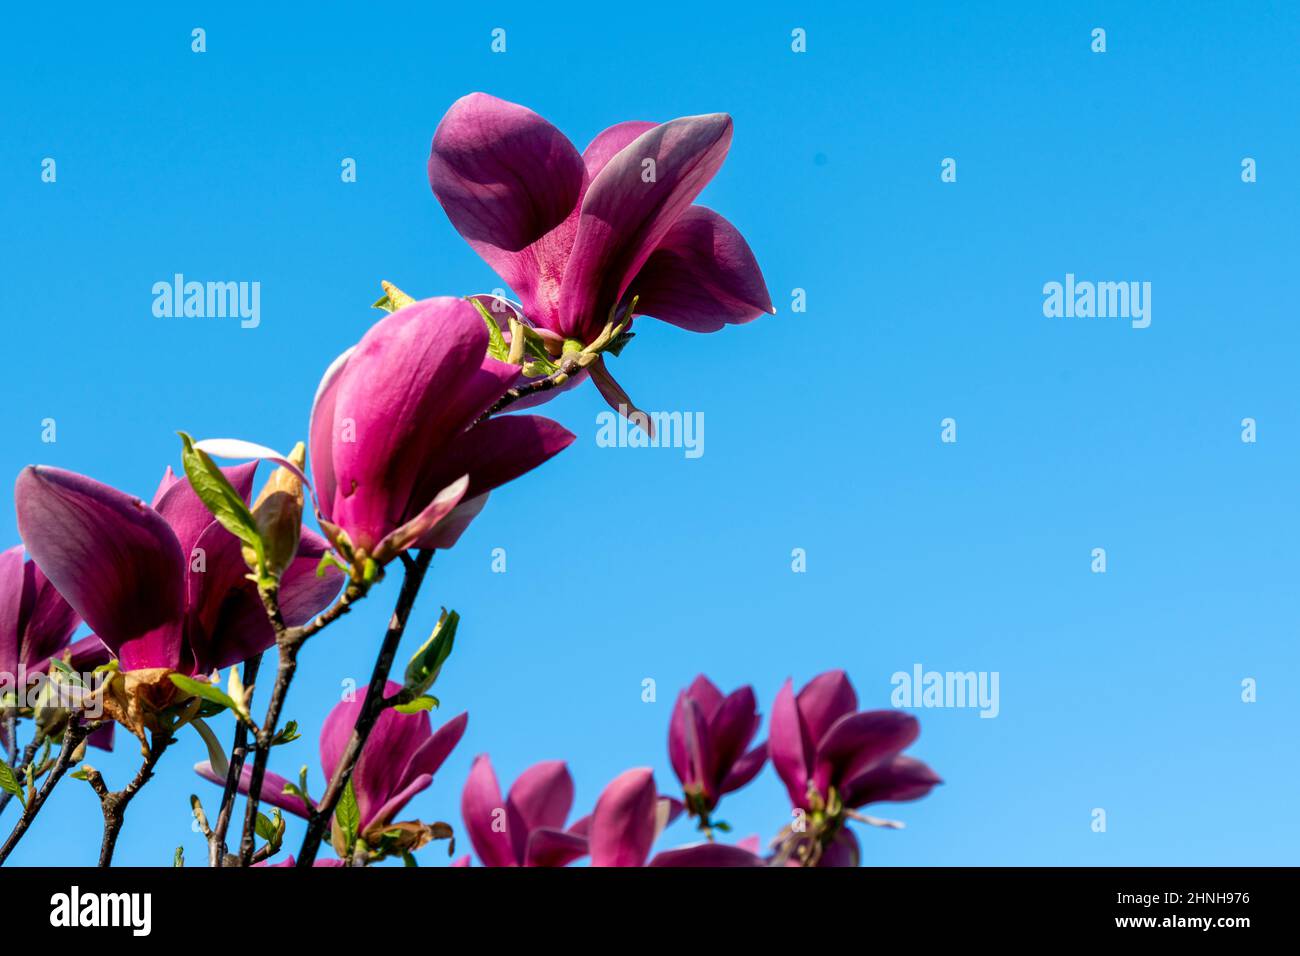 Flowering magnolia branches against a perfectly clear blue sky. Rich red magnolia flowers against a deep blue sky Stock Photo